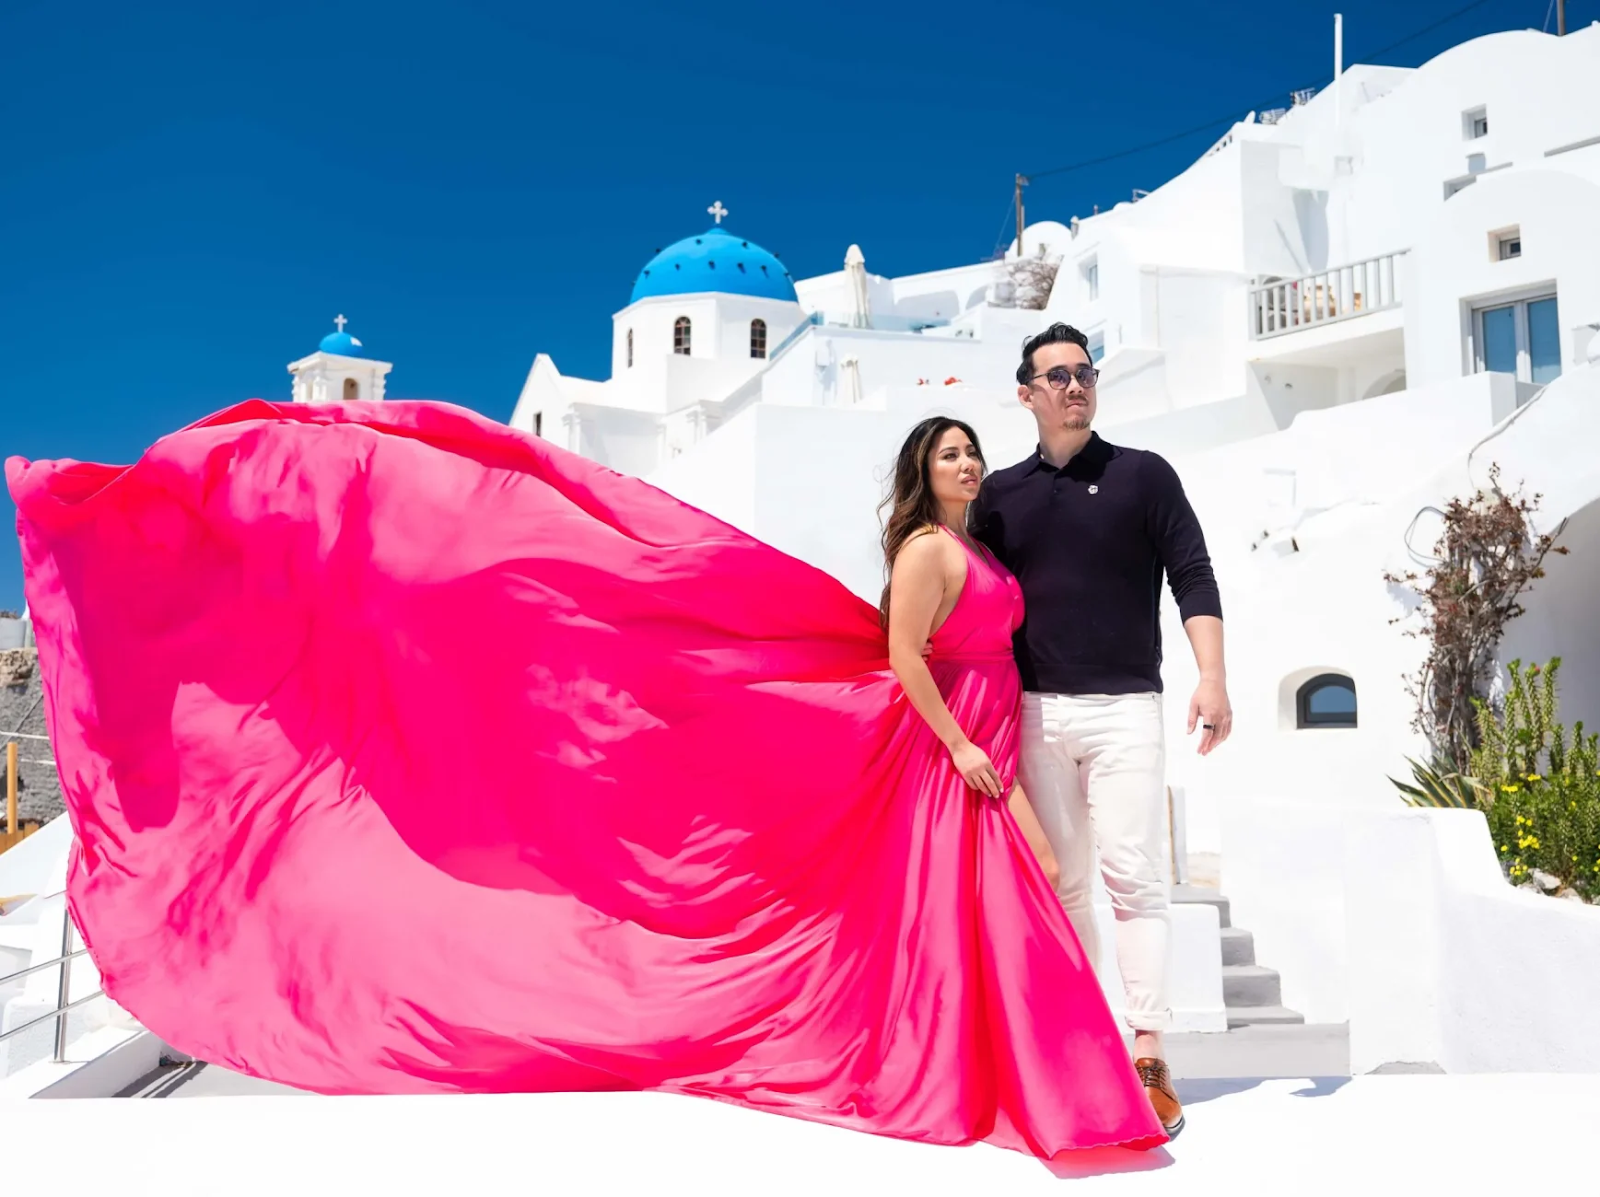 Behind the Lens with Yannis: Capturing Flying Dresses Photoshoot in Greece